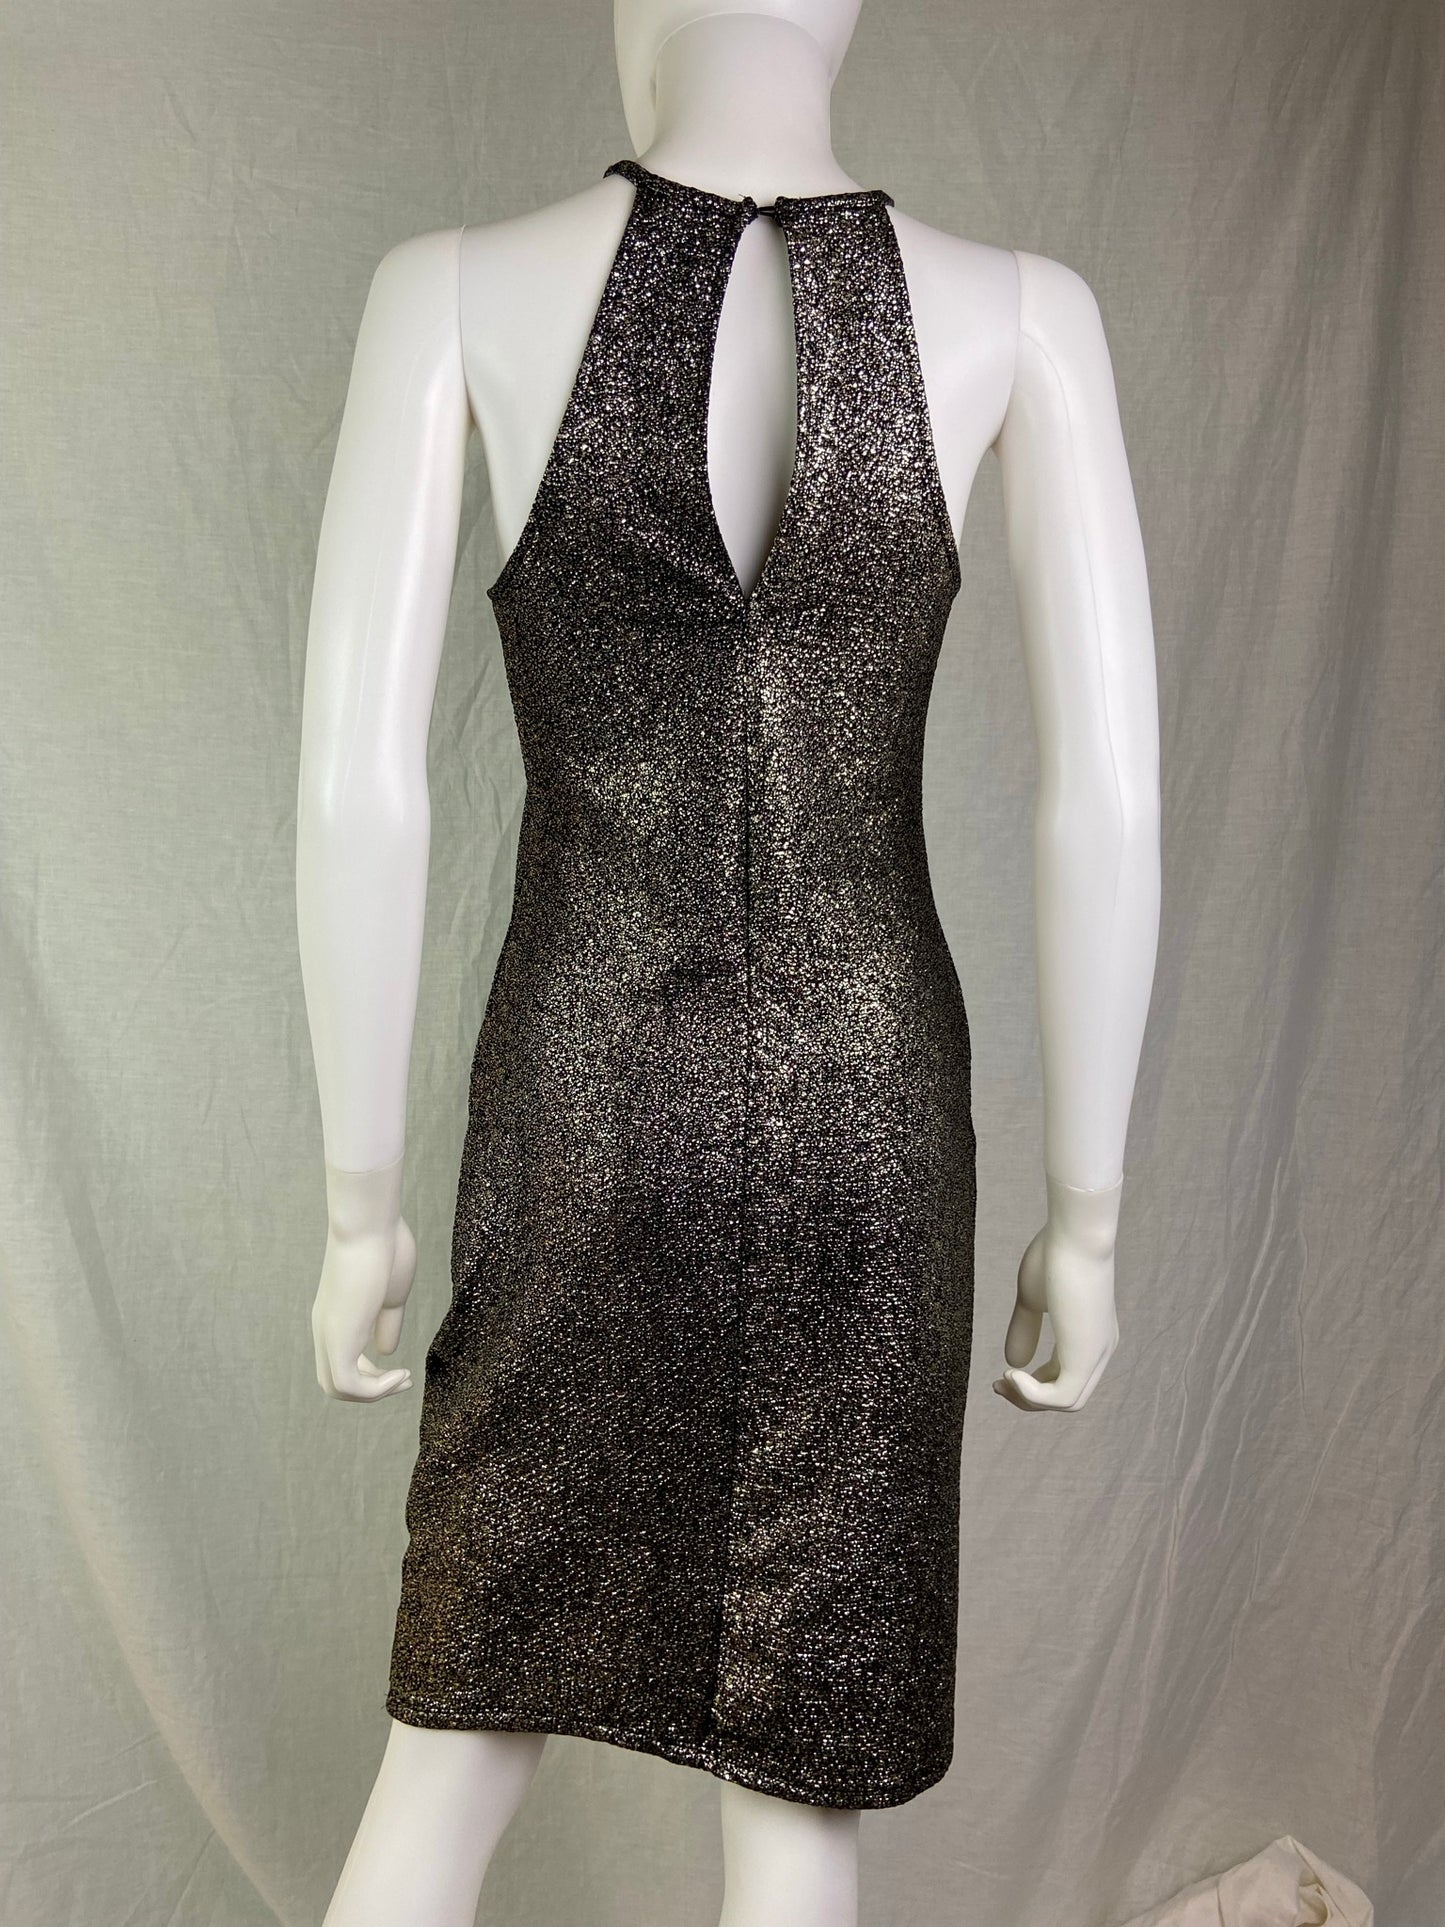 One Clothing Gold Silver Pewter Black Foil Stretch Cocktail Dress